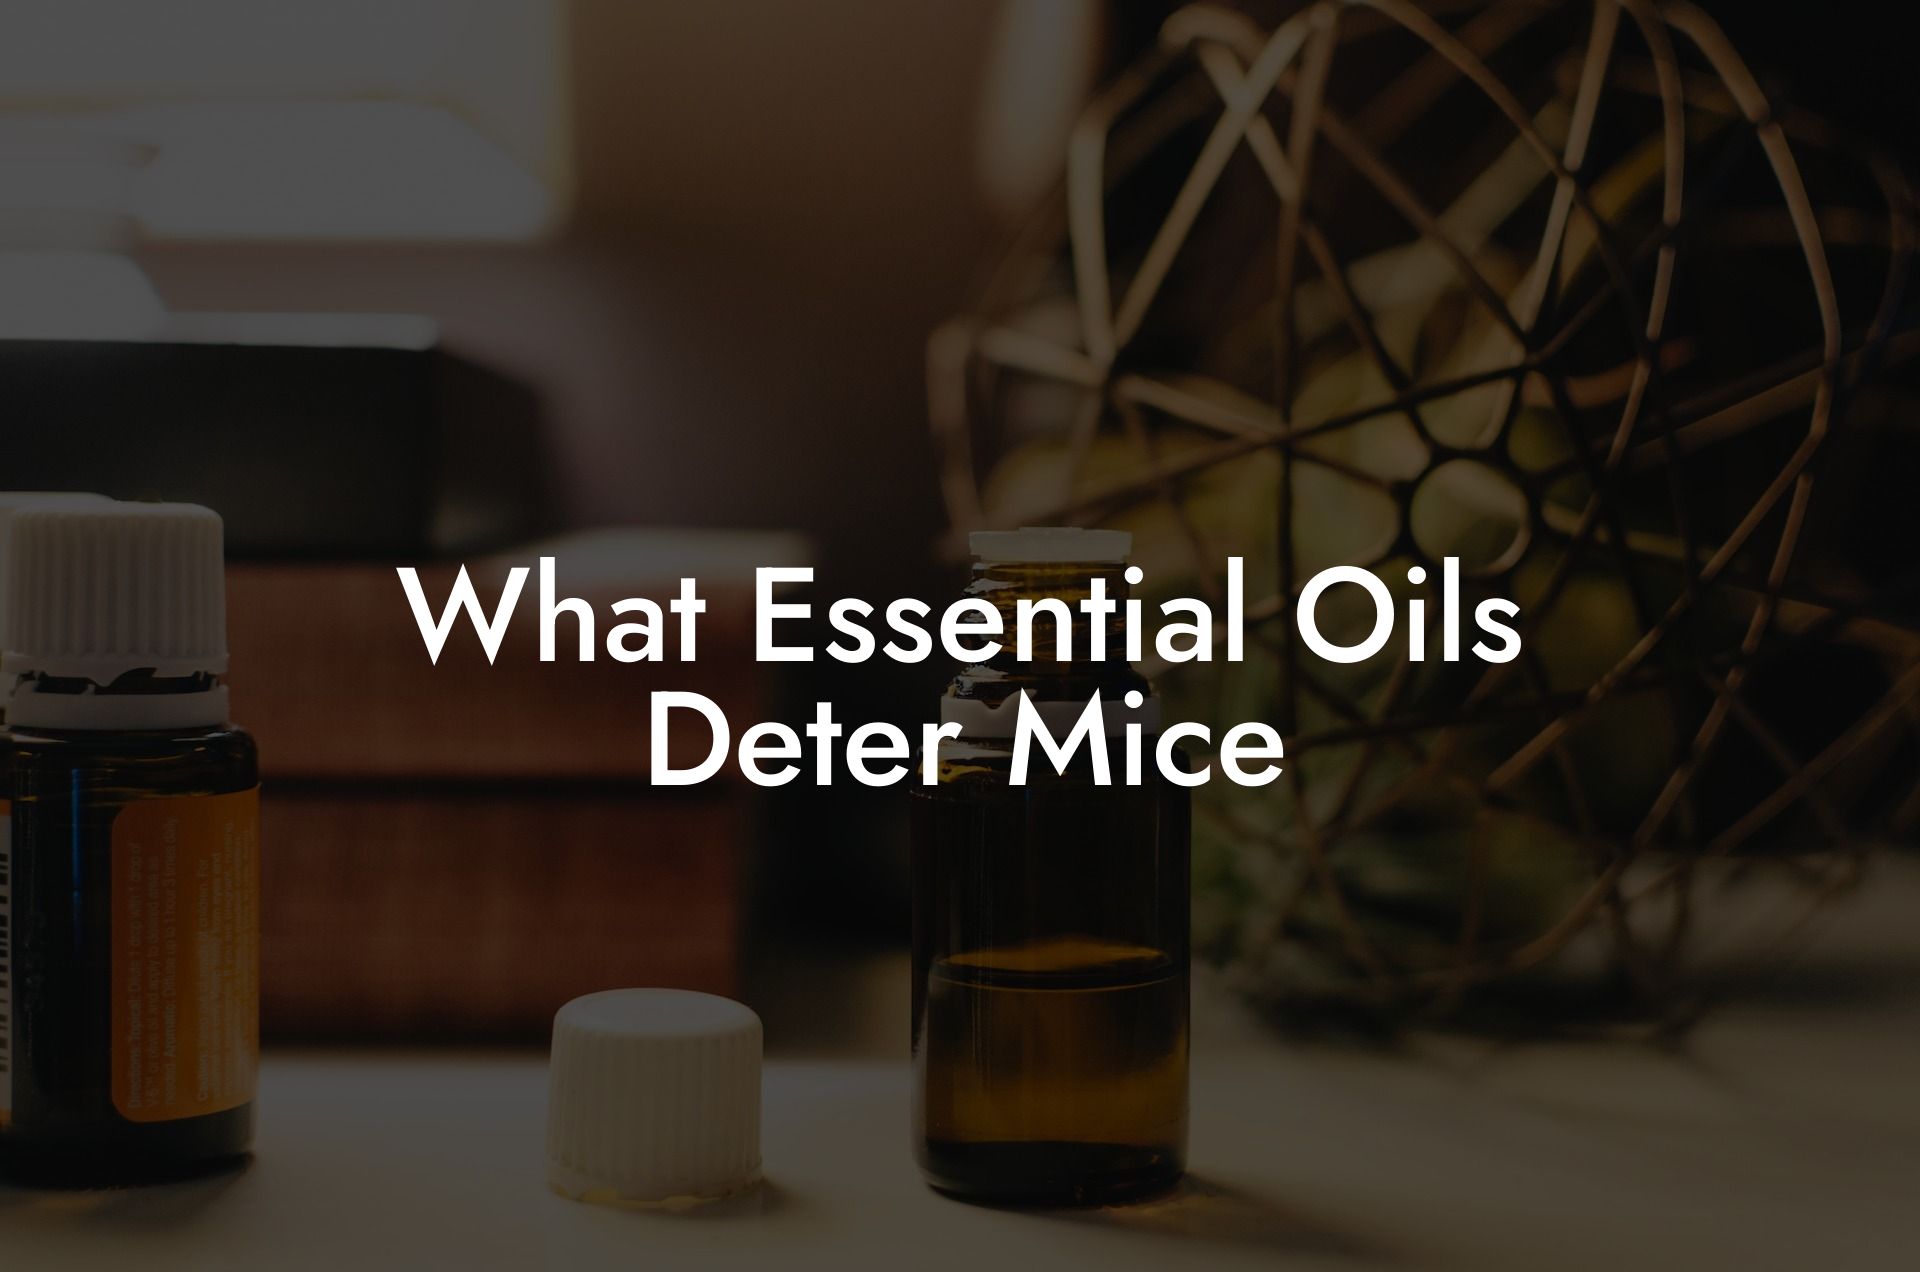 What Essential Oils Deter Mice